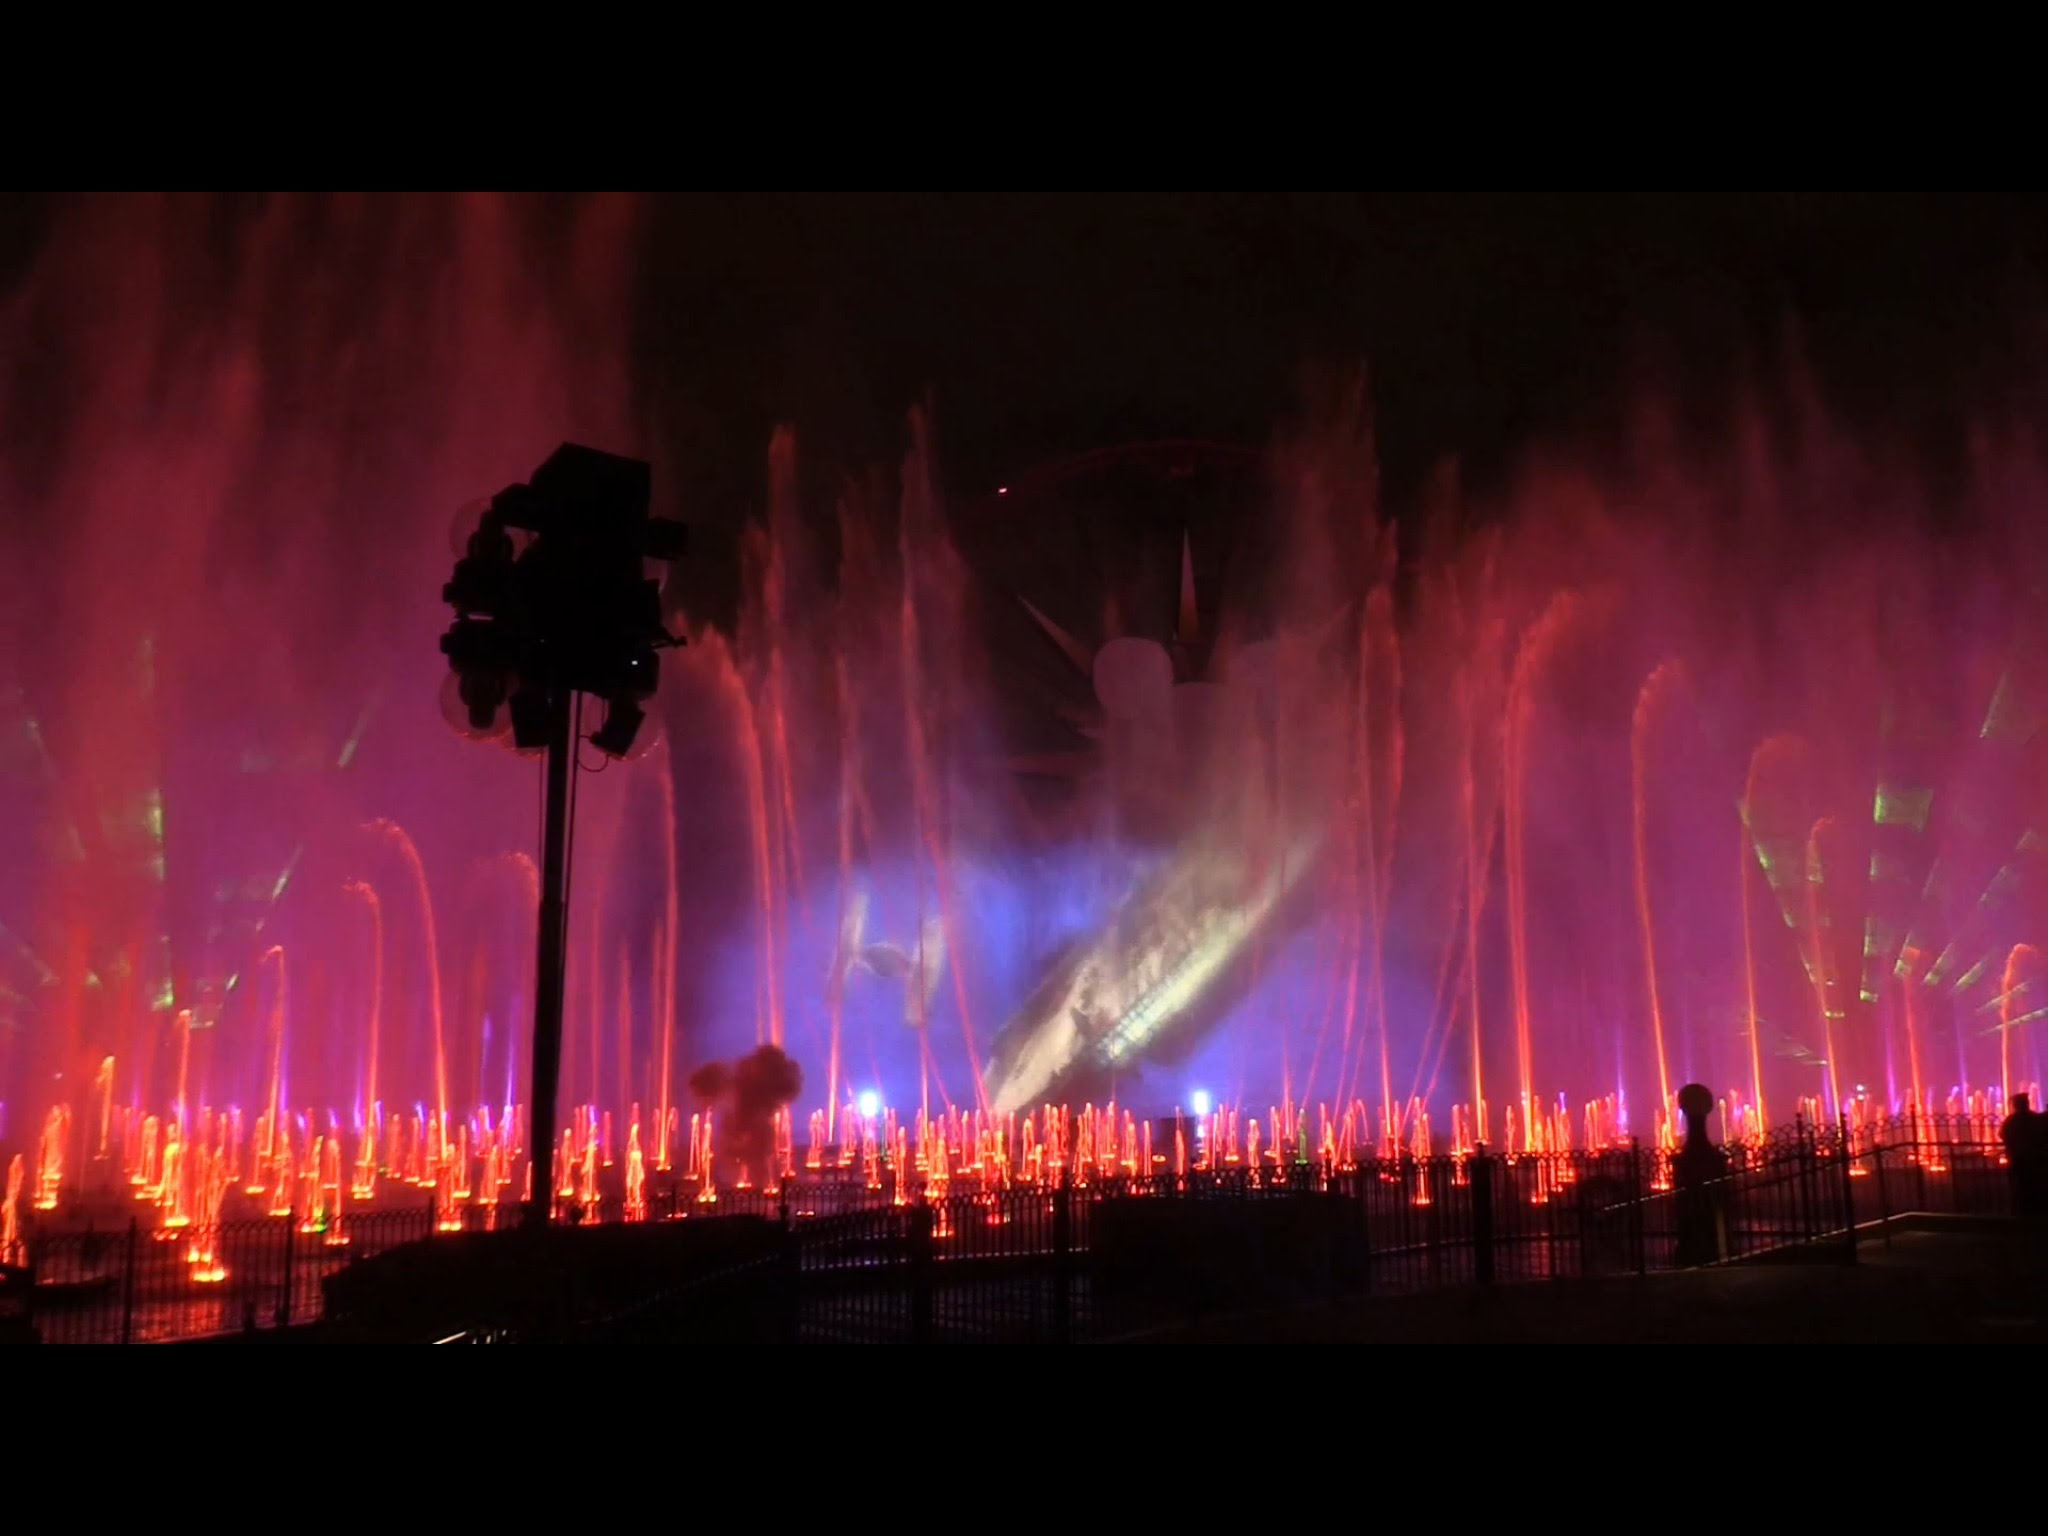 Star Wars The Force Awakens World of Color Celebrate segment at